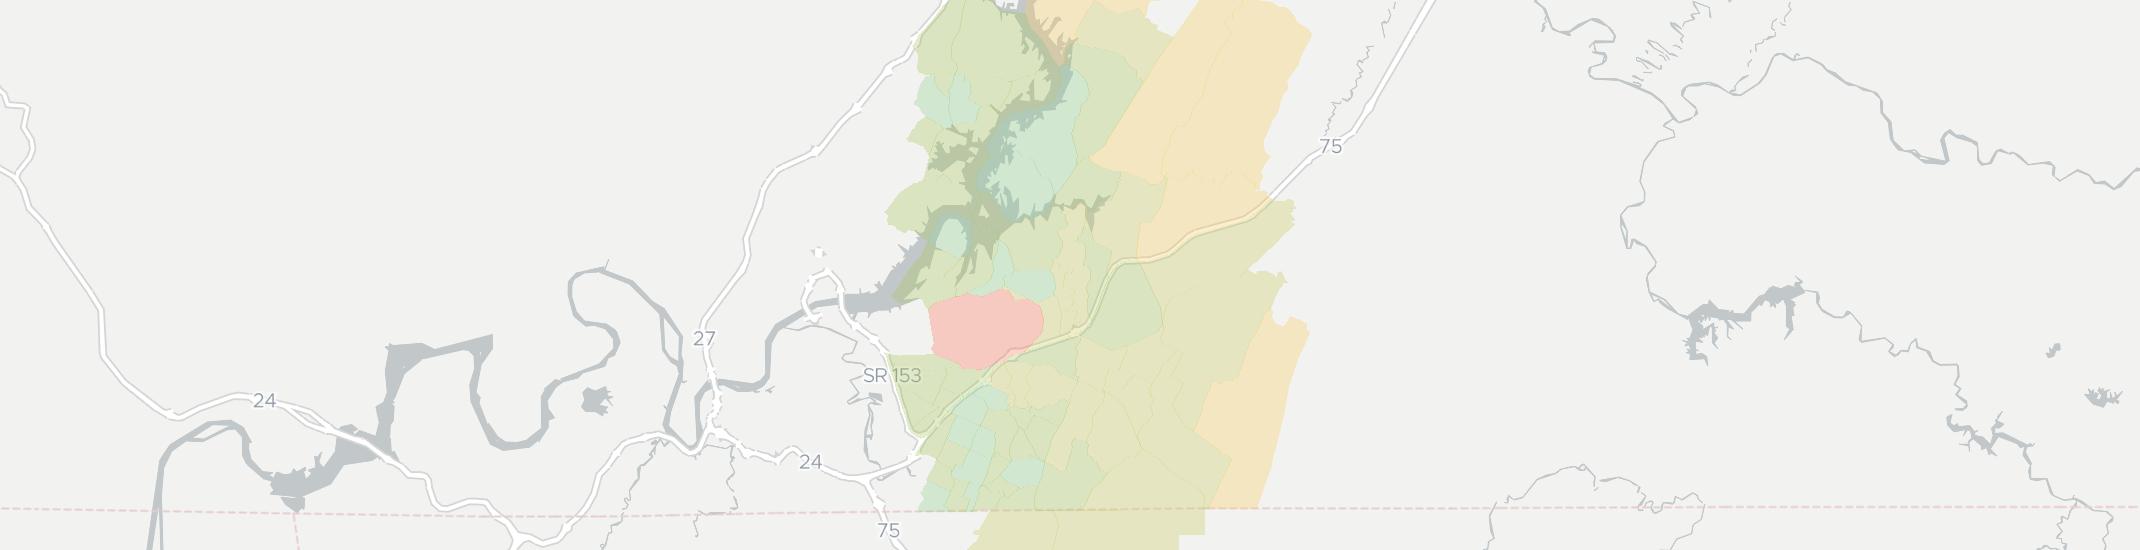 Ooltewah Internet Competition Map. Click for interactive map.